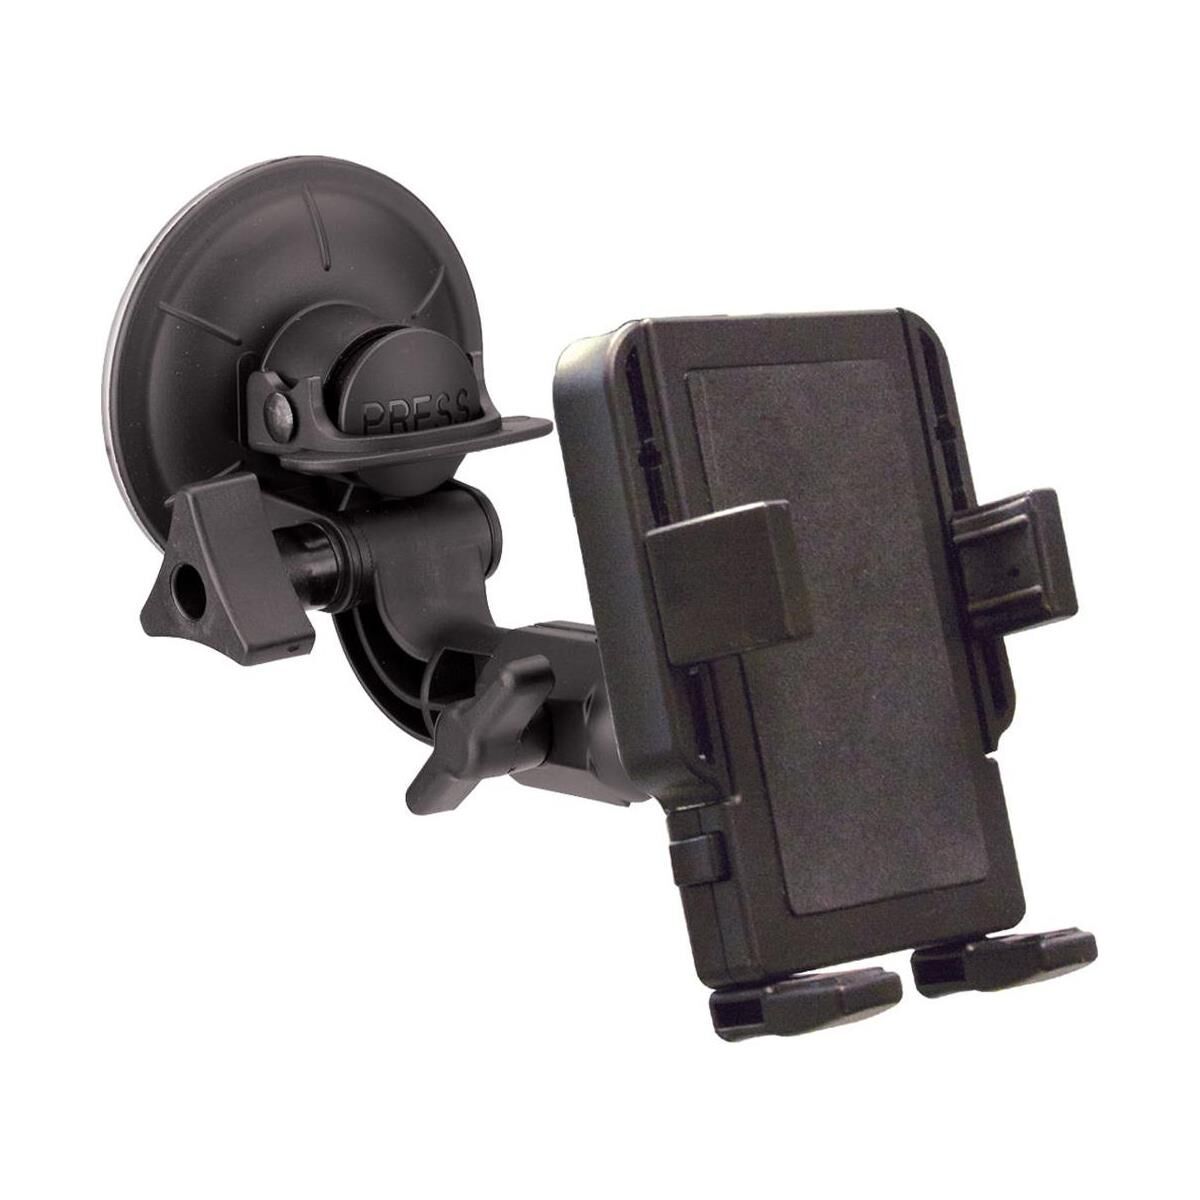 PanaVise PortaGrip Universal Phone Holder with 809-AMP Suction Cup Mount